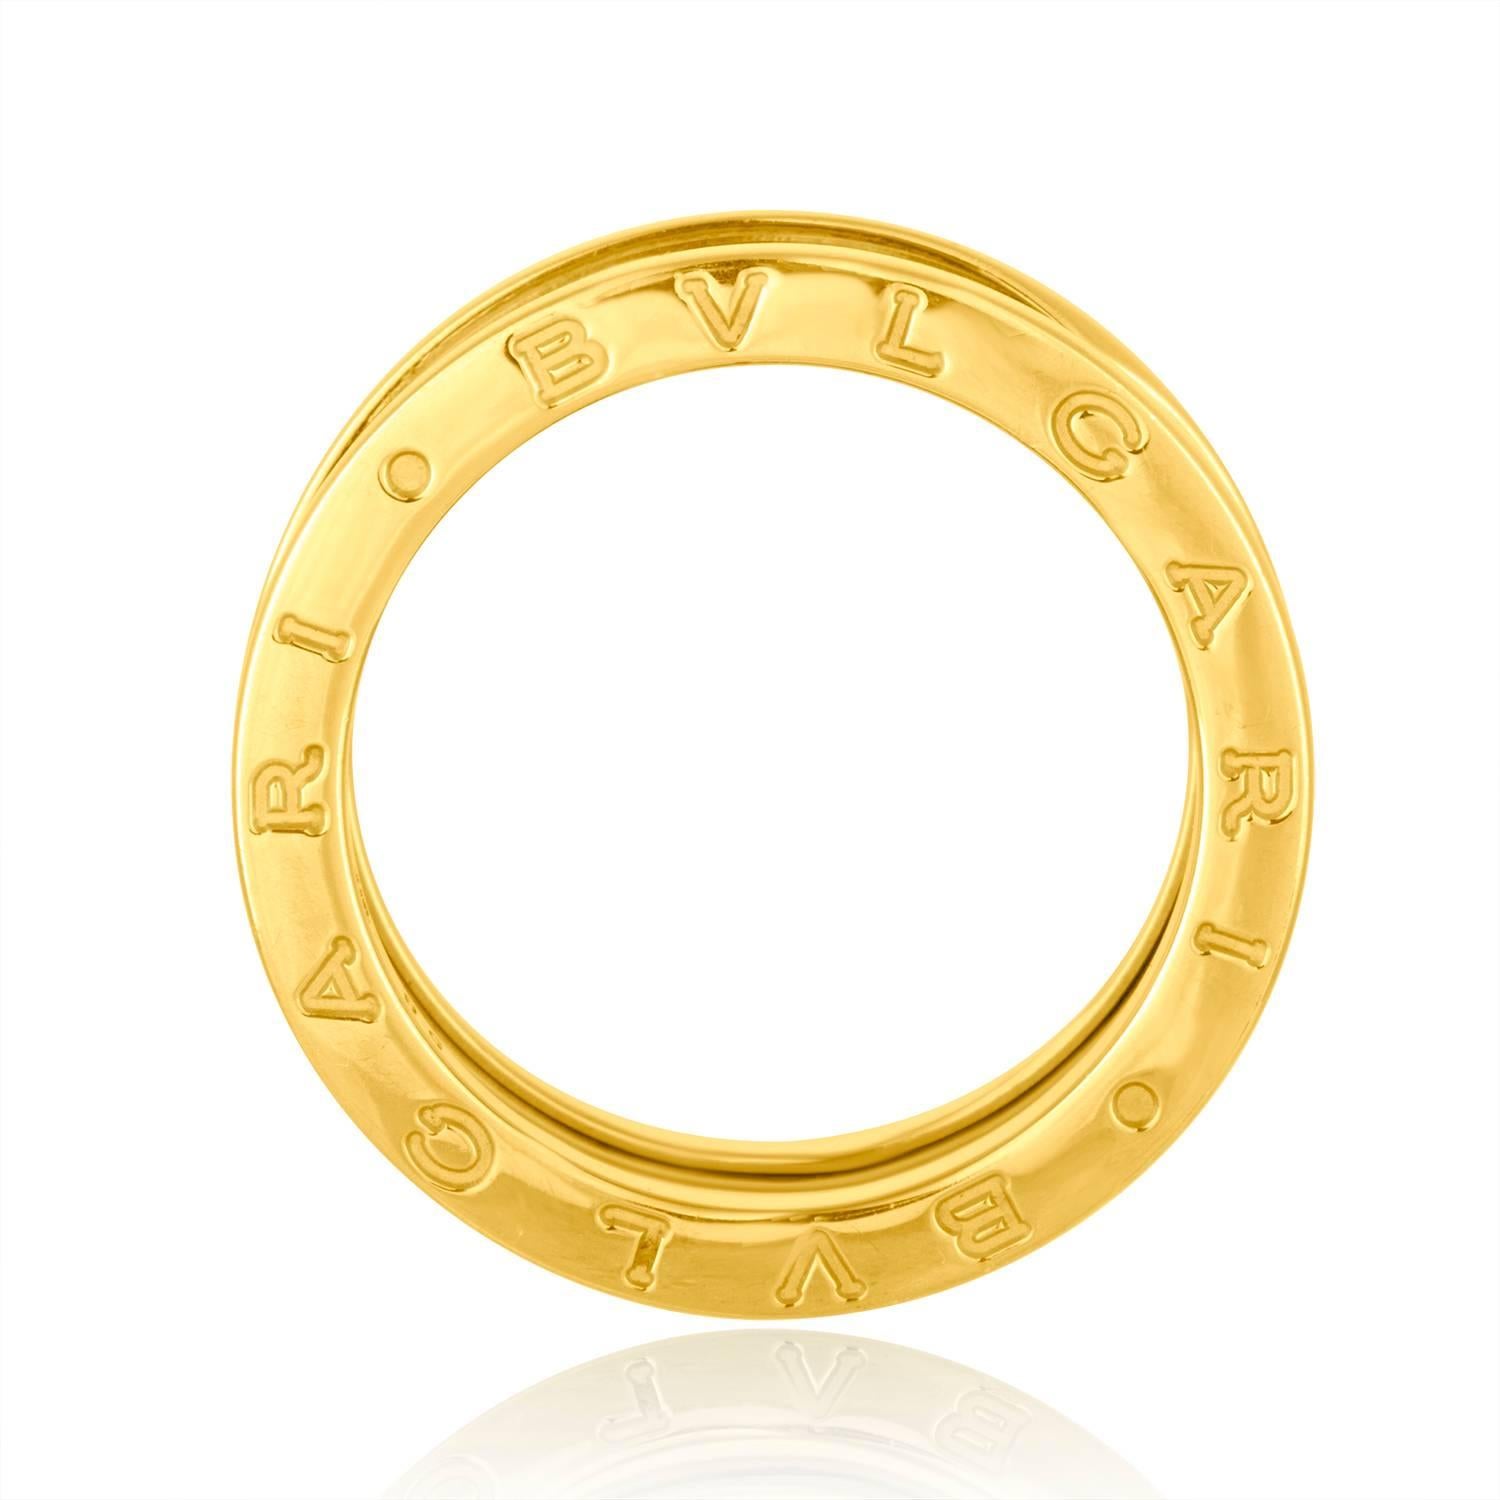 B.zero1 3-band Ring.
The ring is 18K Yellow Gold.
The ring is a size 8.5 or 58.
The ring weighs 10.8 grams.